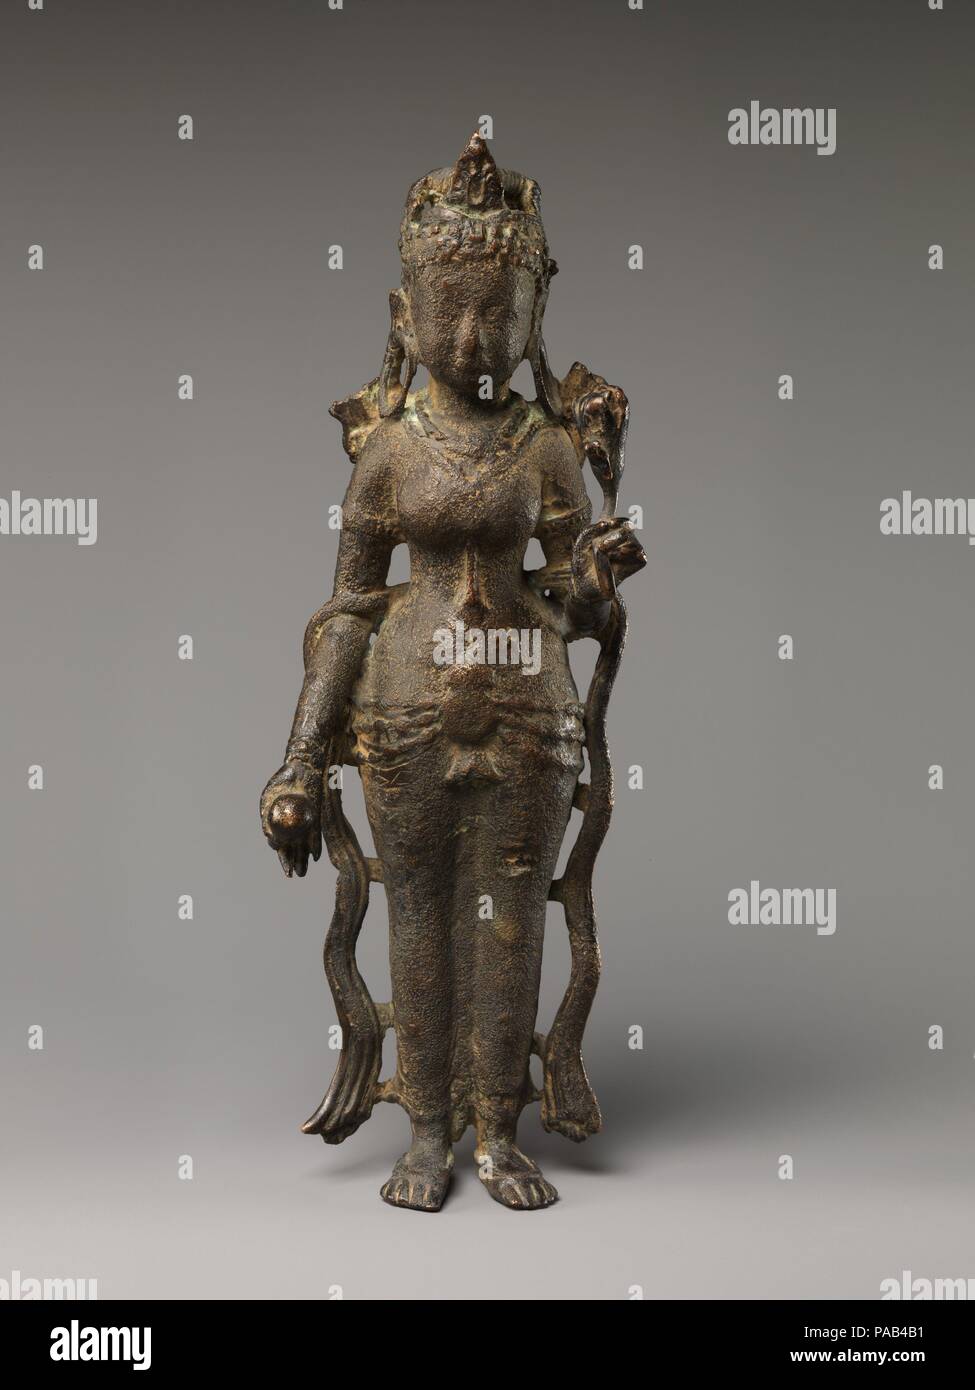 Tara. Culture: North India (possibly Uttar Pradesh). Dimensions: H. 12 in. (30.5 cm). Date: ca. 7th century.  This elegant, full-bodied figure of a Buddhist saviouress holding a long-stemmed lotus suggests affiliations with Avalokiteshvara, the bodhisattva of compassion. The highly modeled jeweled girdle and flowing sashes hanging free of the body point to a seventh-century date, placing her among the earliest representations of Tara known from North India. The closest analogy is a bejeweled Gaja Lakshmi depicted on a copper seal with Brahmi script datable to the sixth or seventh century, exca Stock Photo